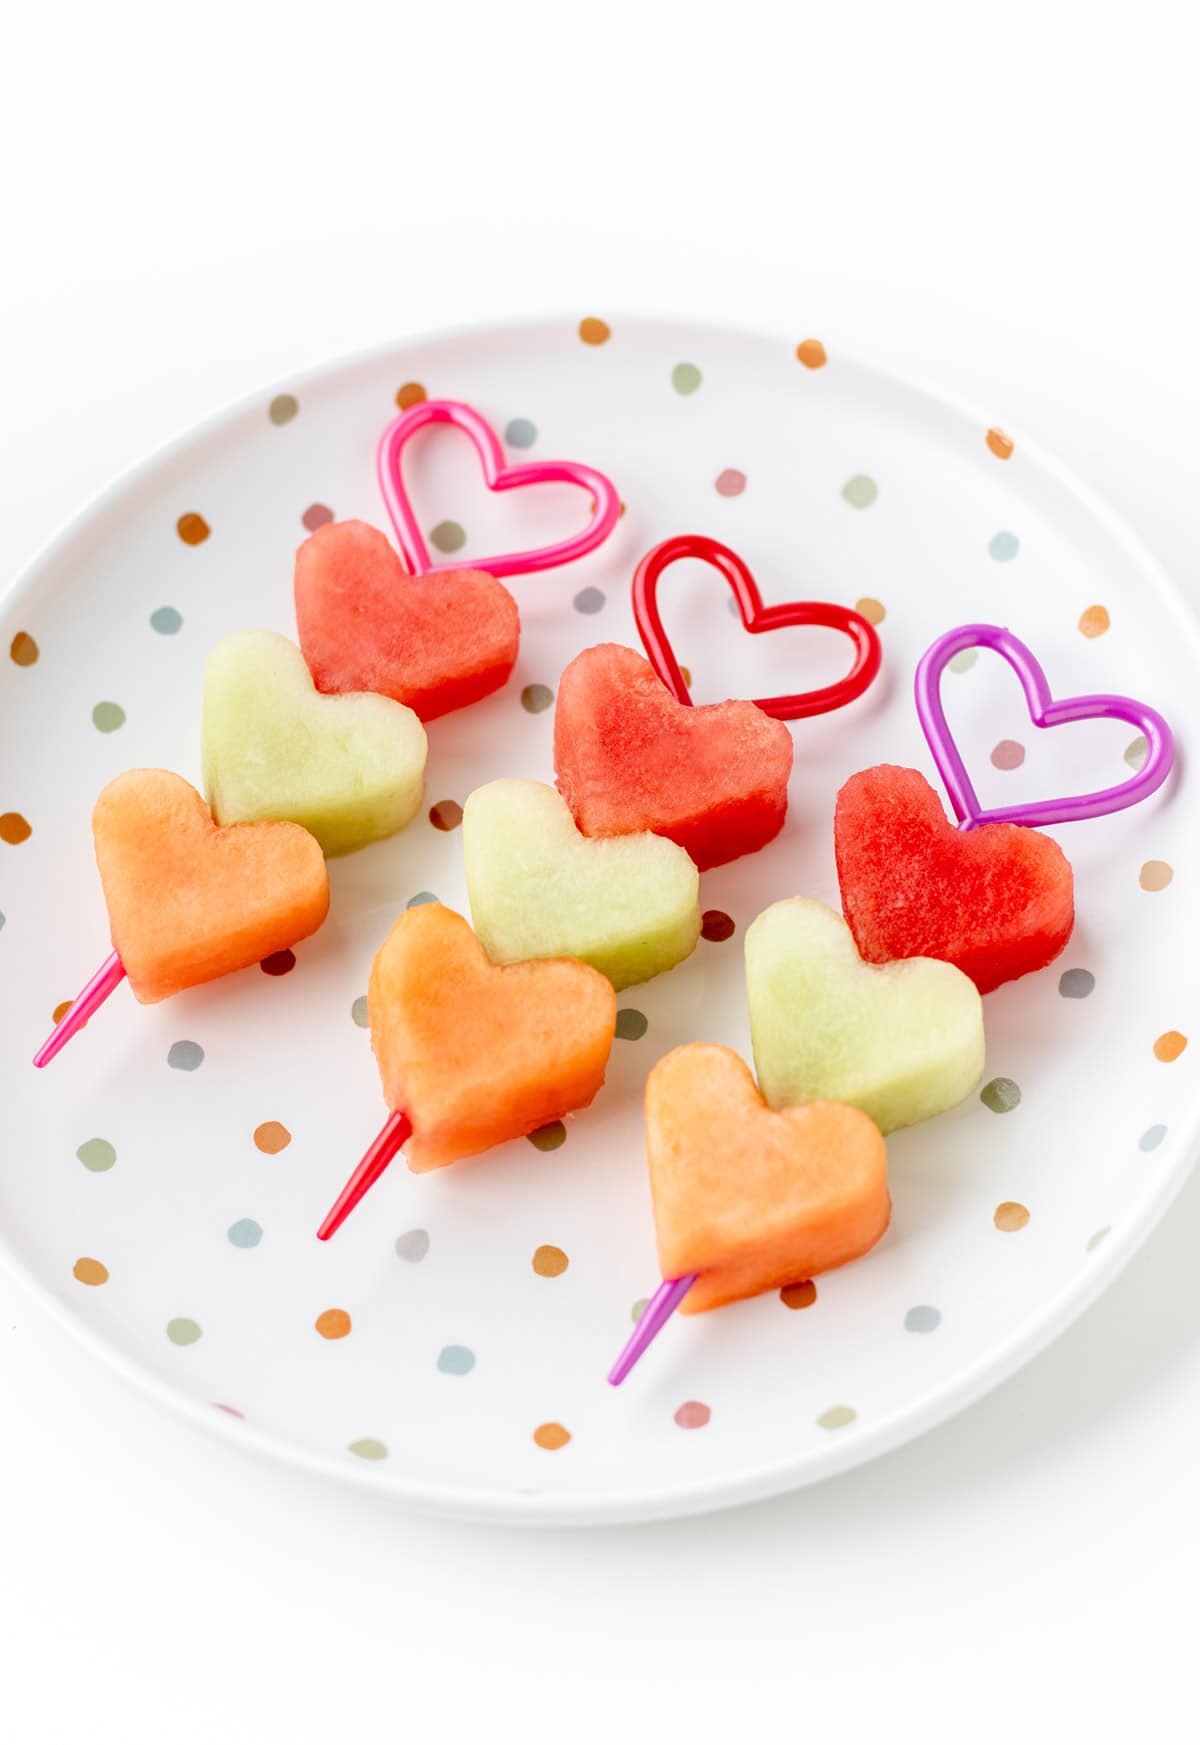 3 heart shaped fruit kabobs lined up on a polka dot plate.